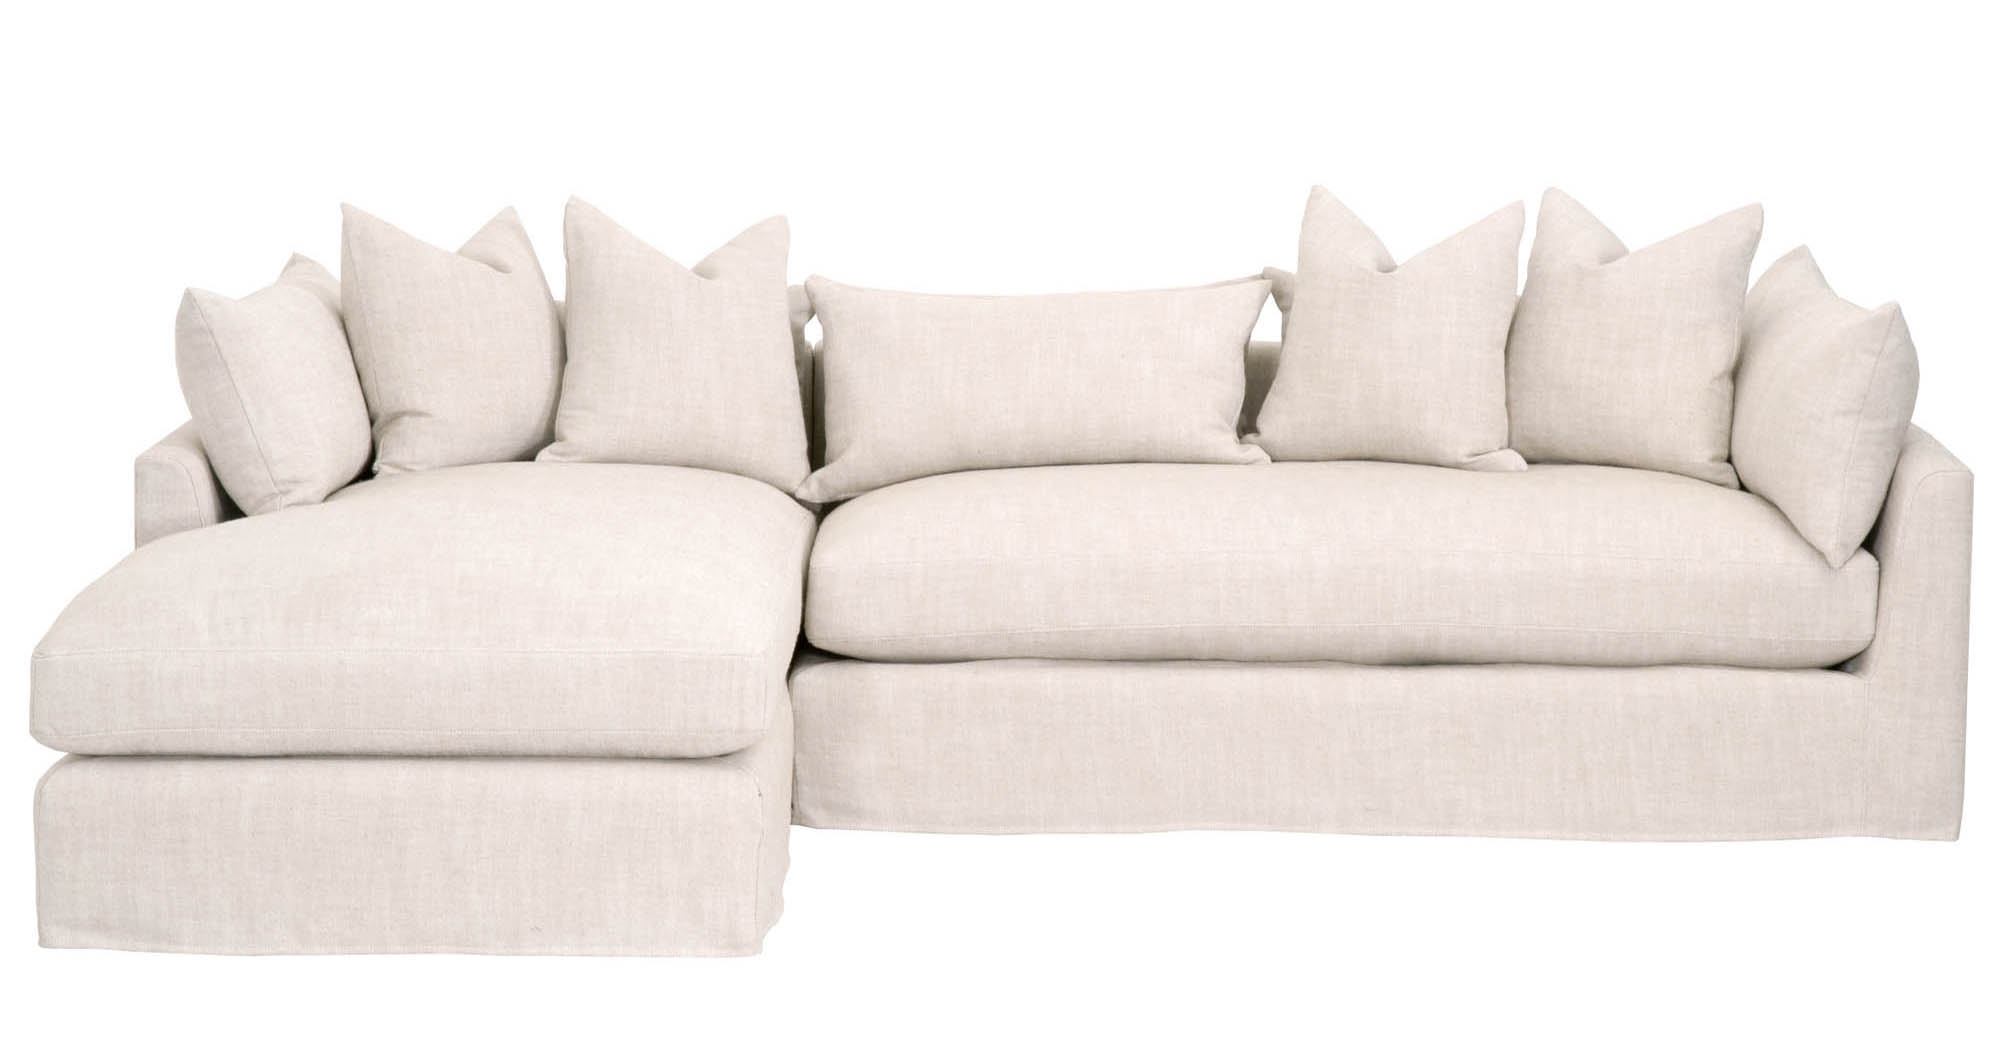 Parque Slipcover Sectional Sofa - Image 1